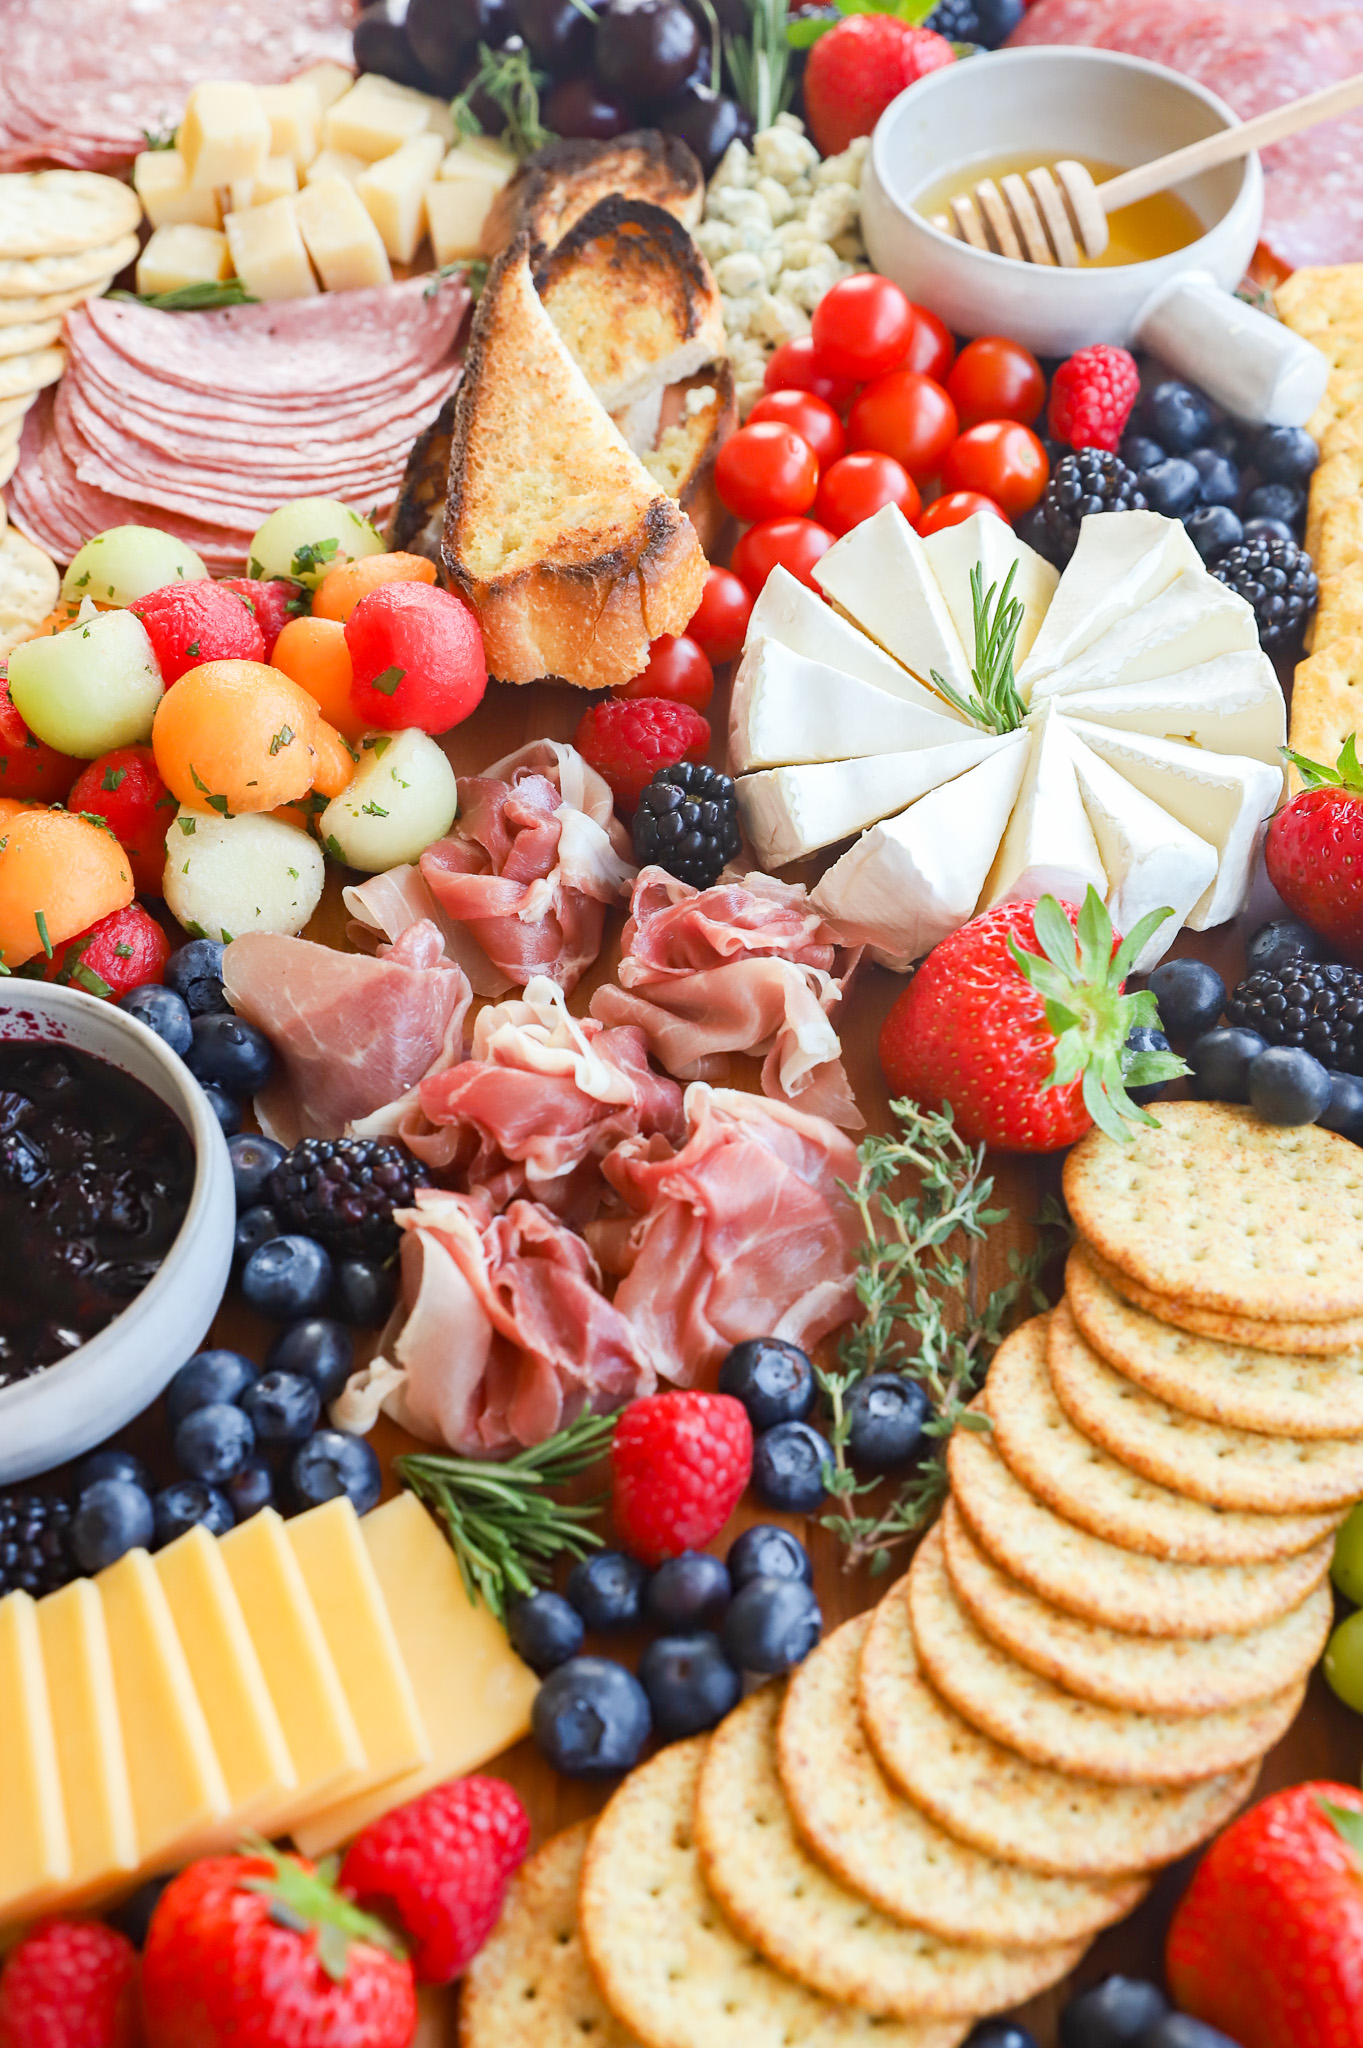 Picture of brie, herbs, fruits, and meats